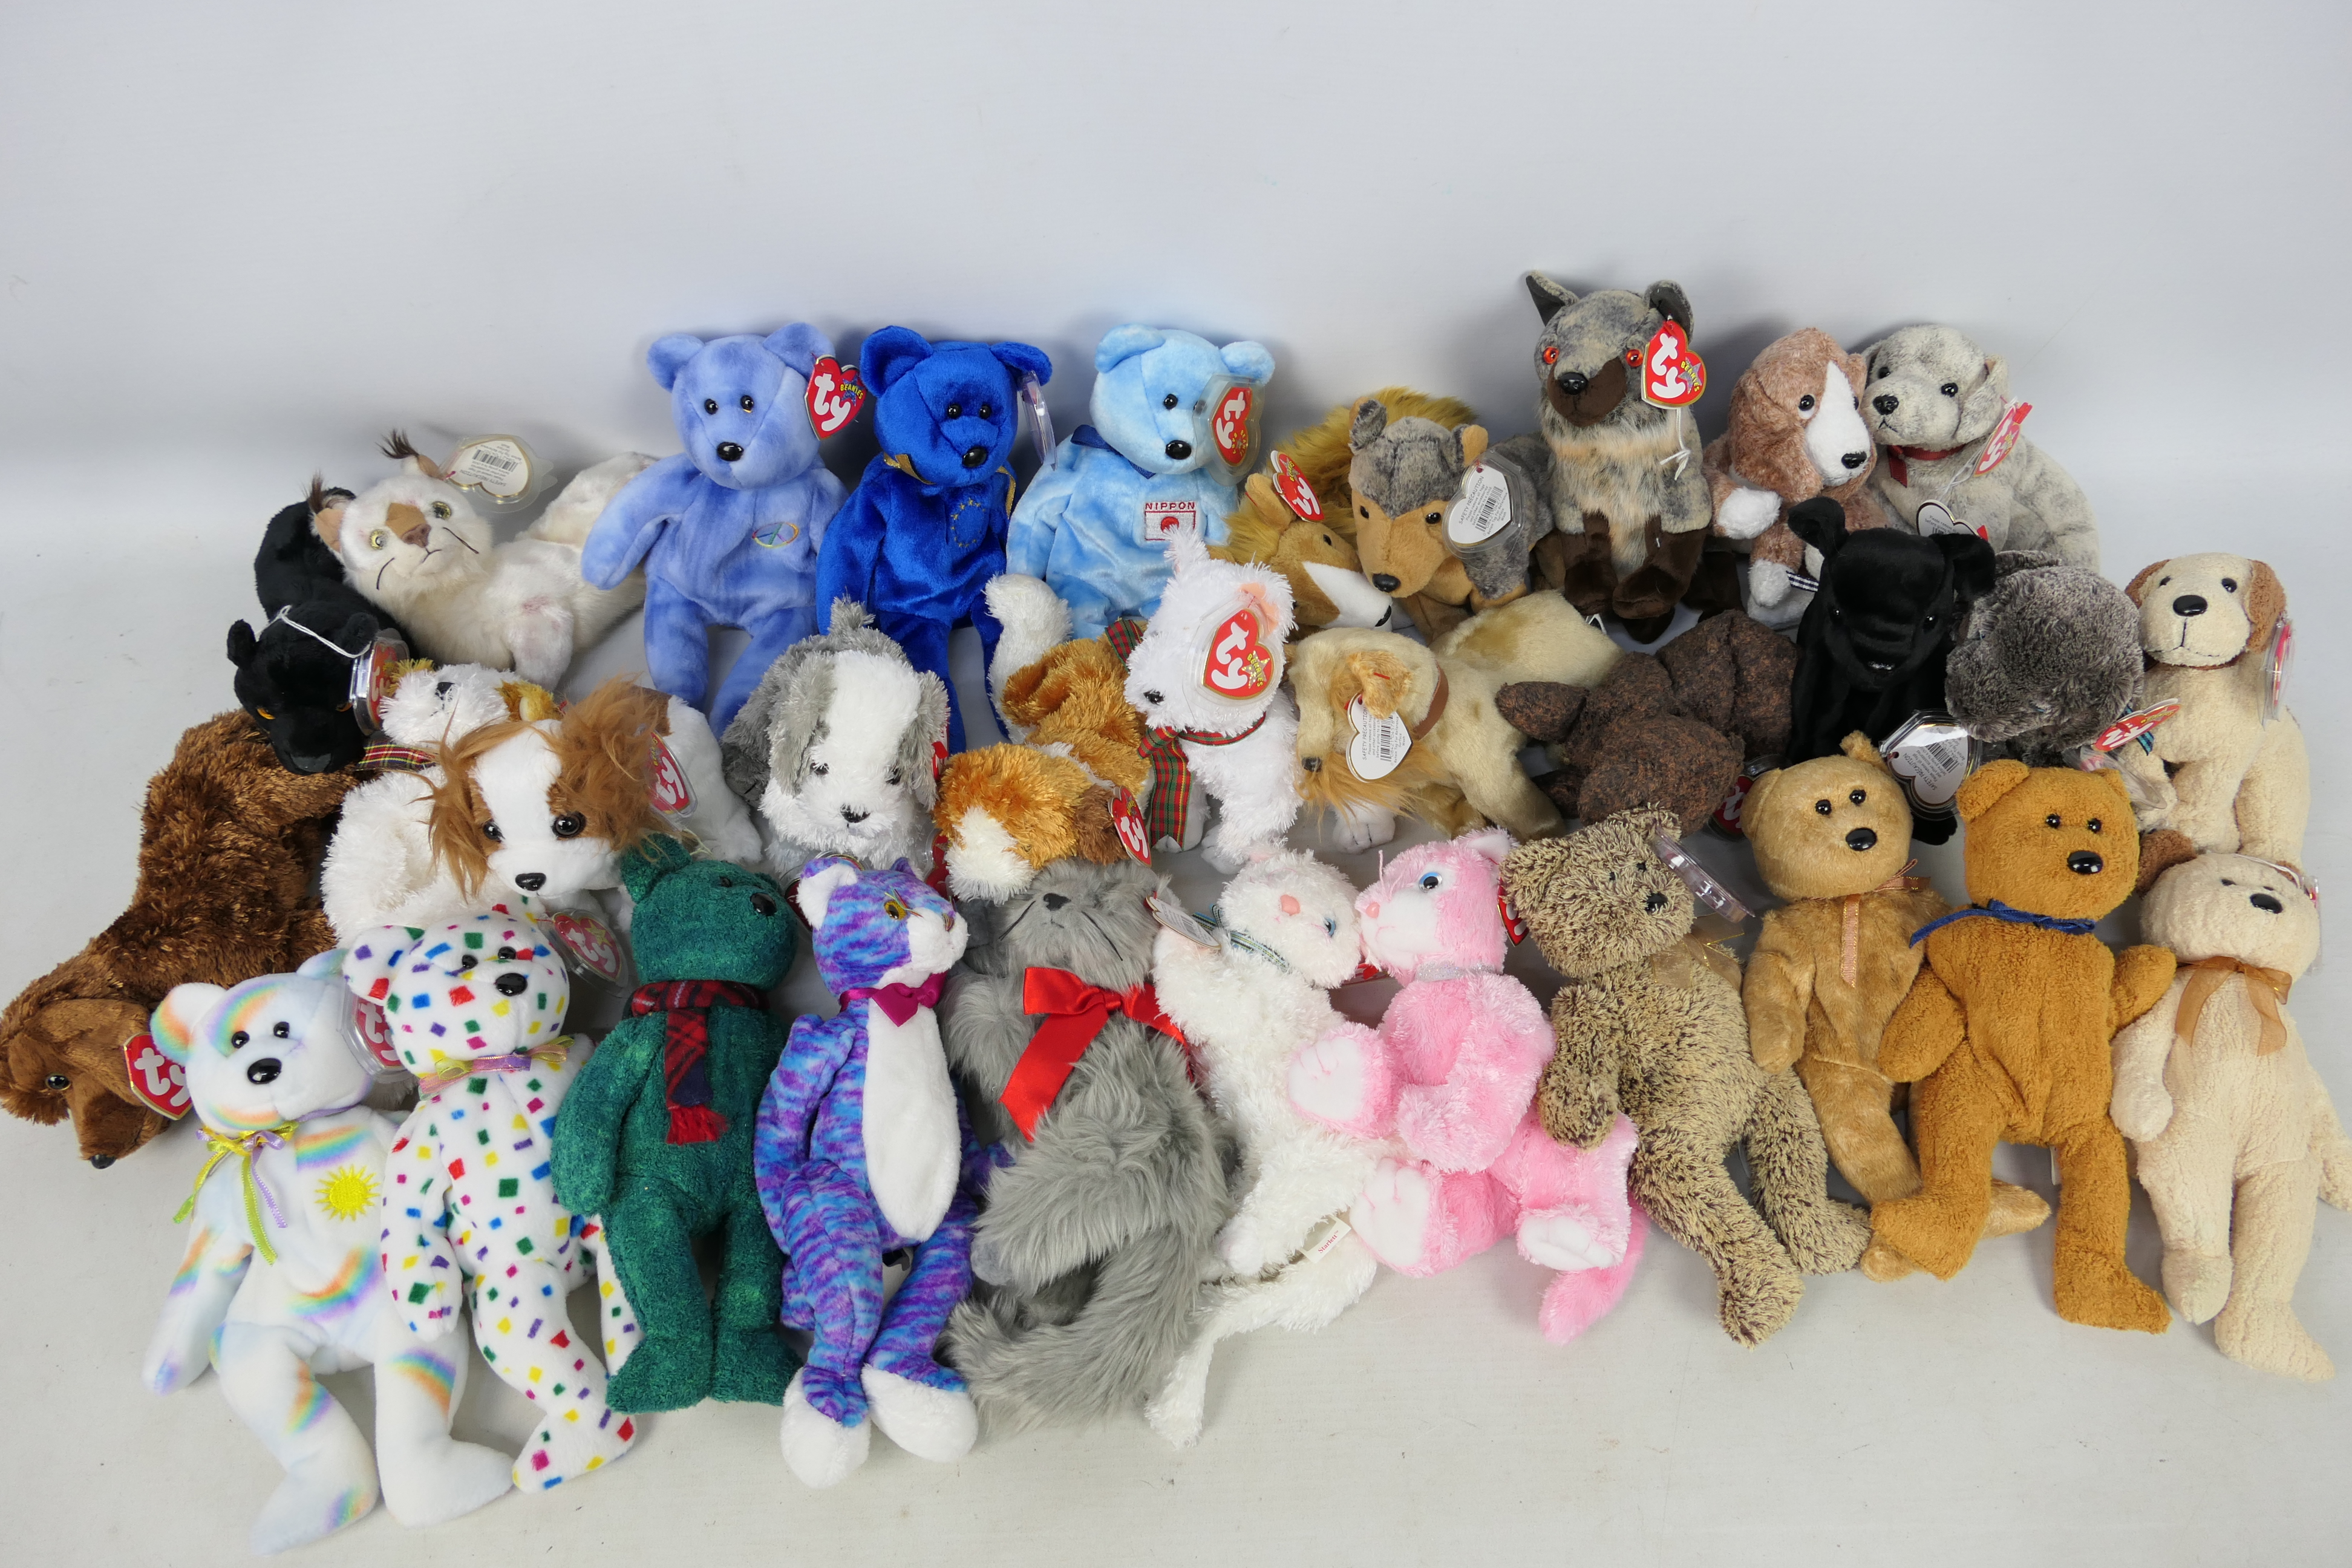 Ty - 32 x Ty Beanie Baby bears and soft toys - Lot includes 5 x dog-themed Beanie Baby soft toys to